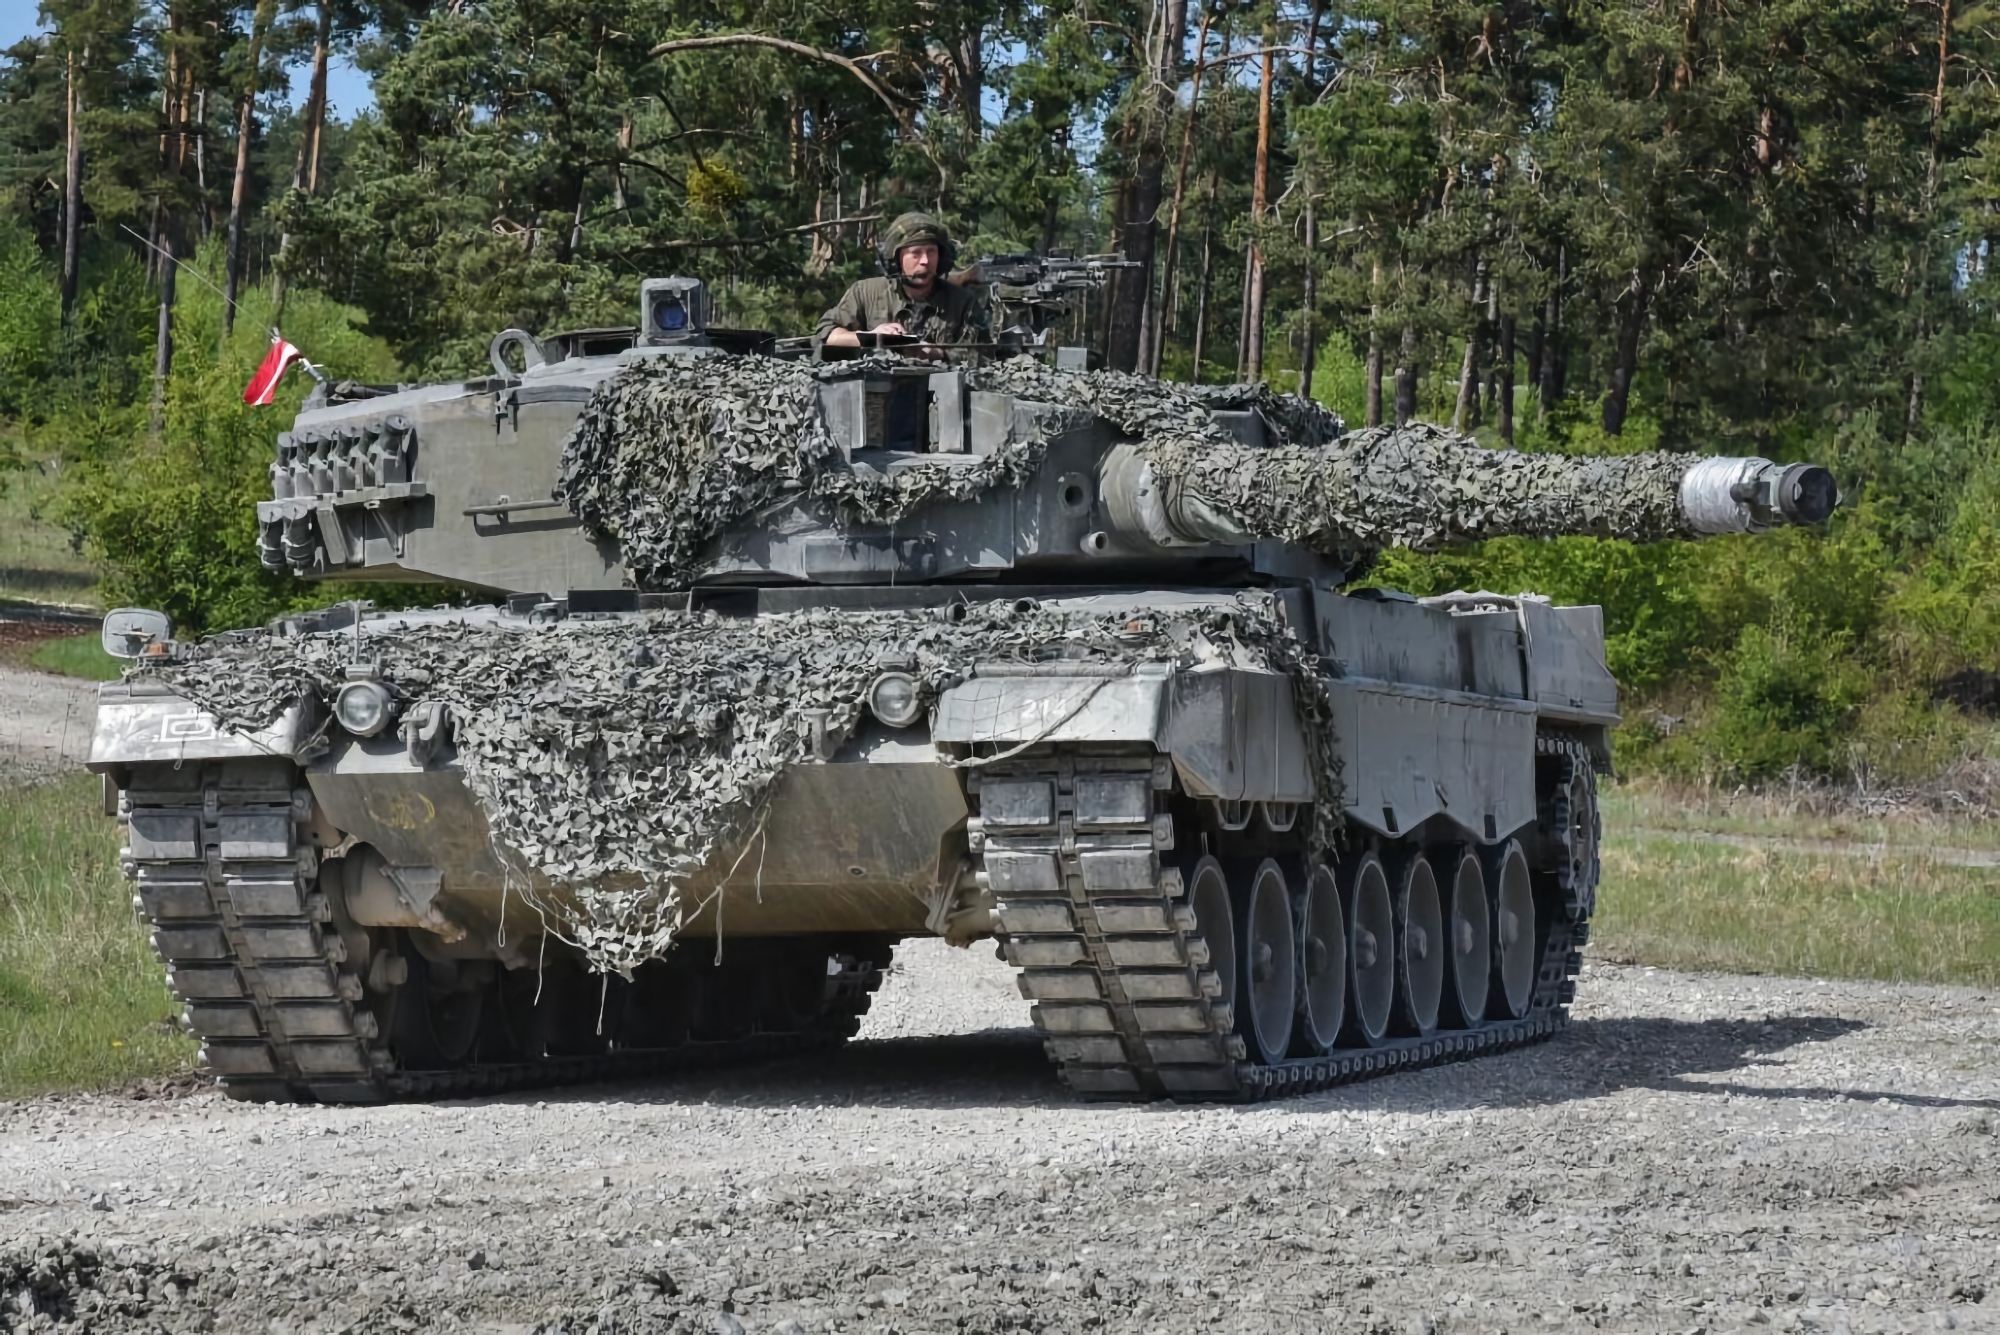 Official: Spain will transfer 6 Leopard 2 tanks to Ukraine